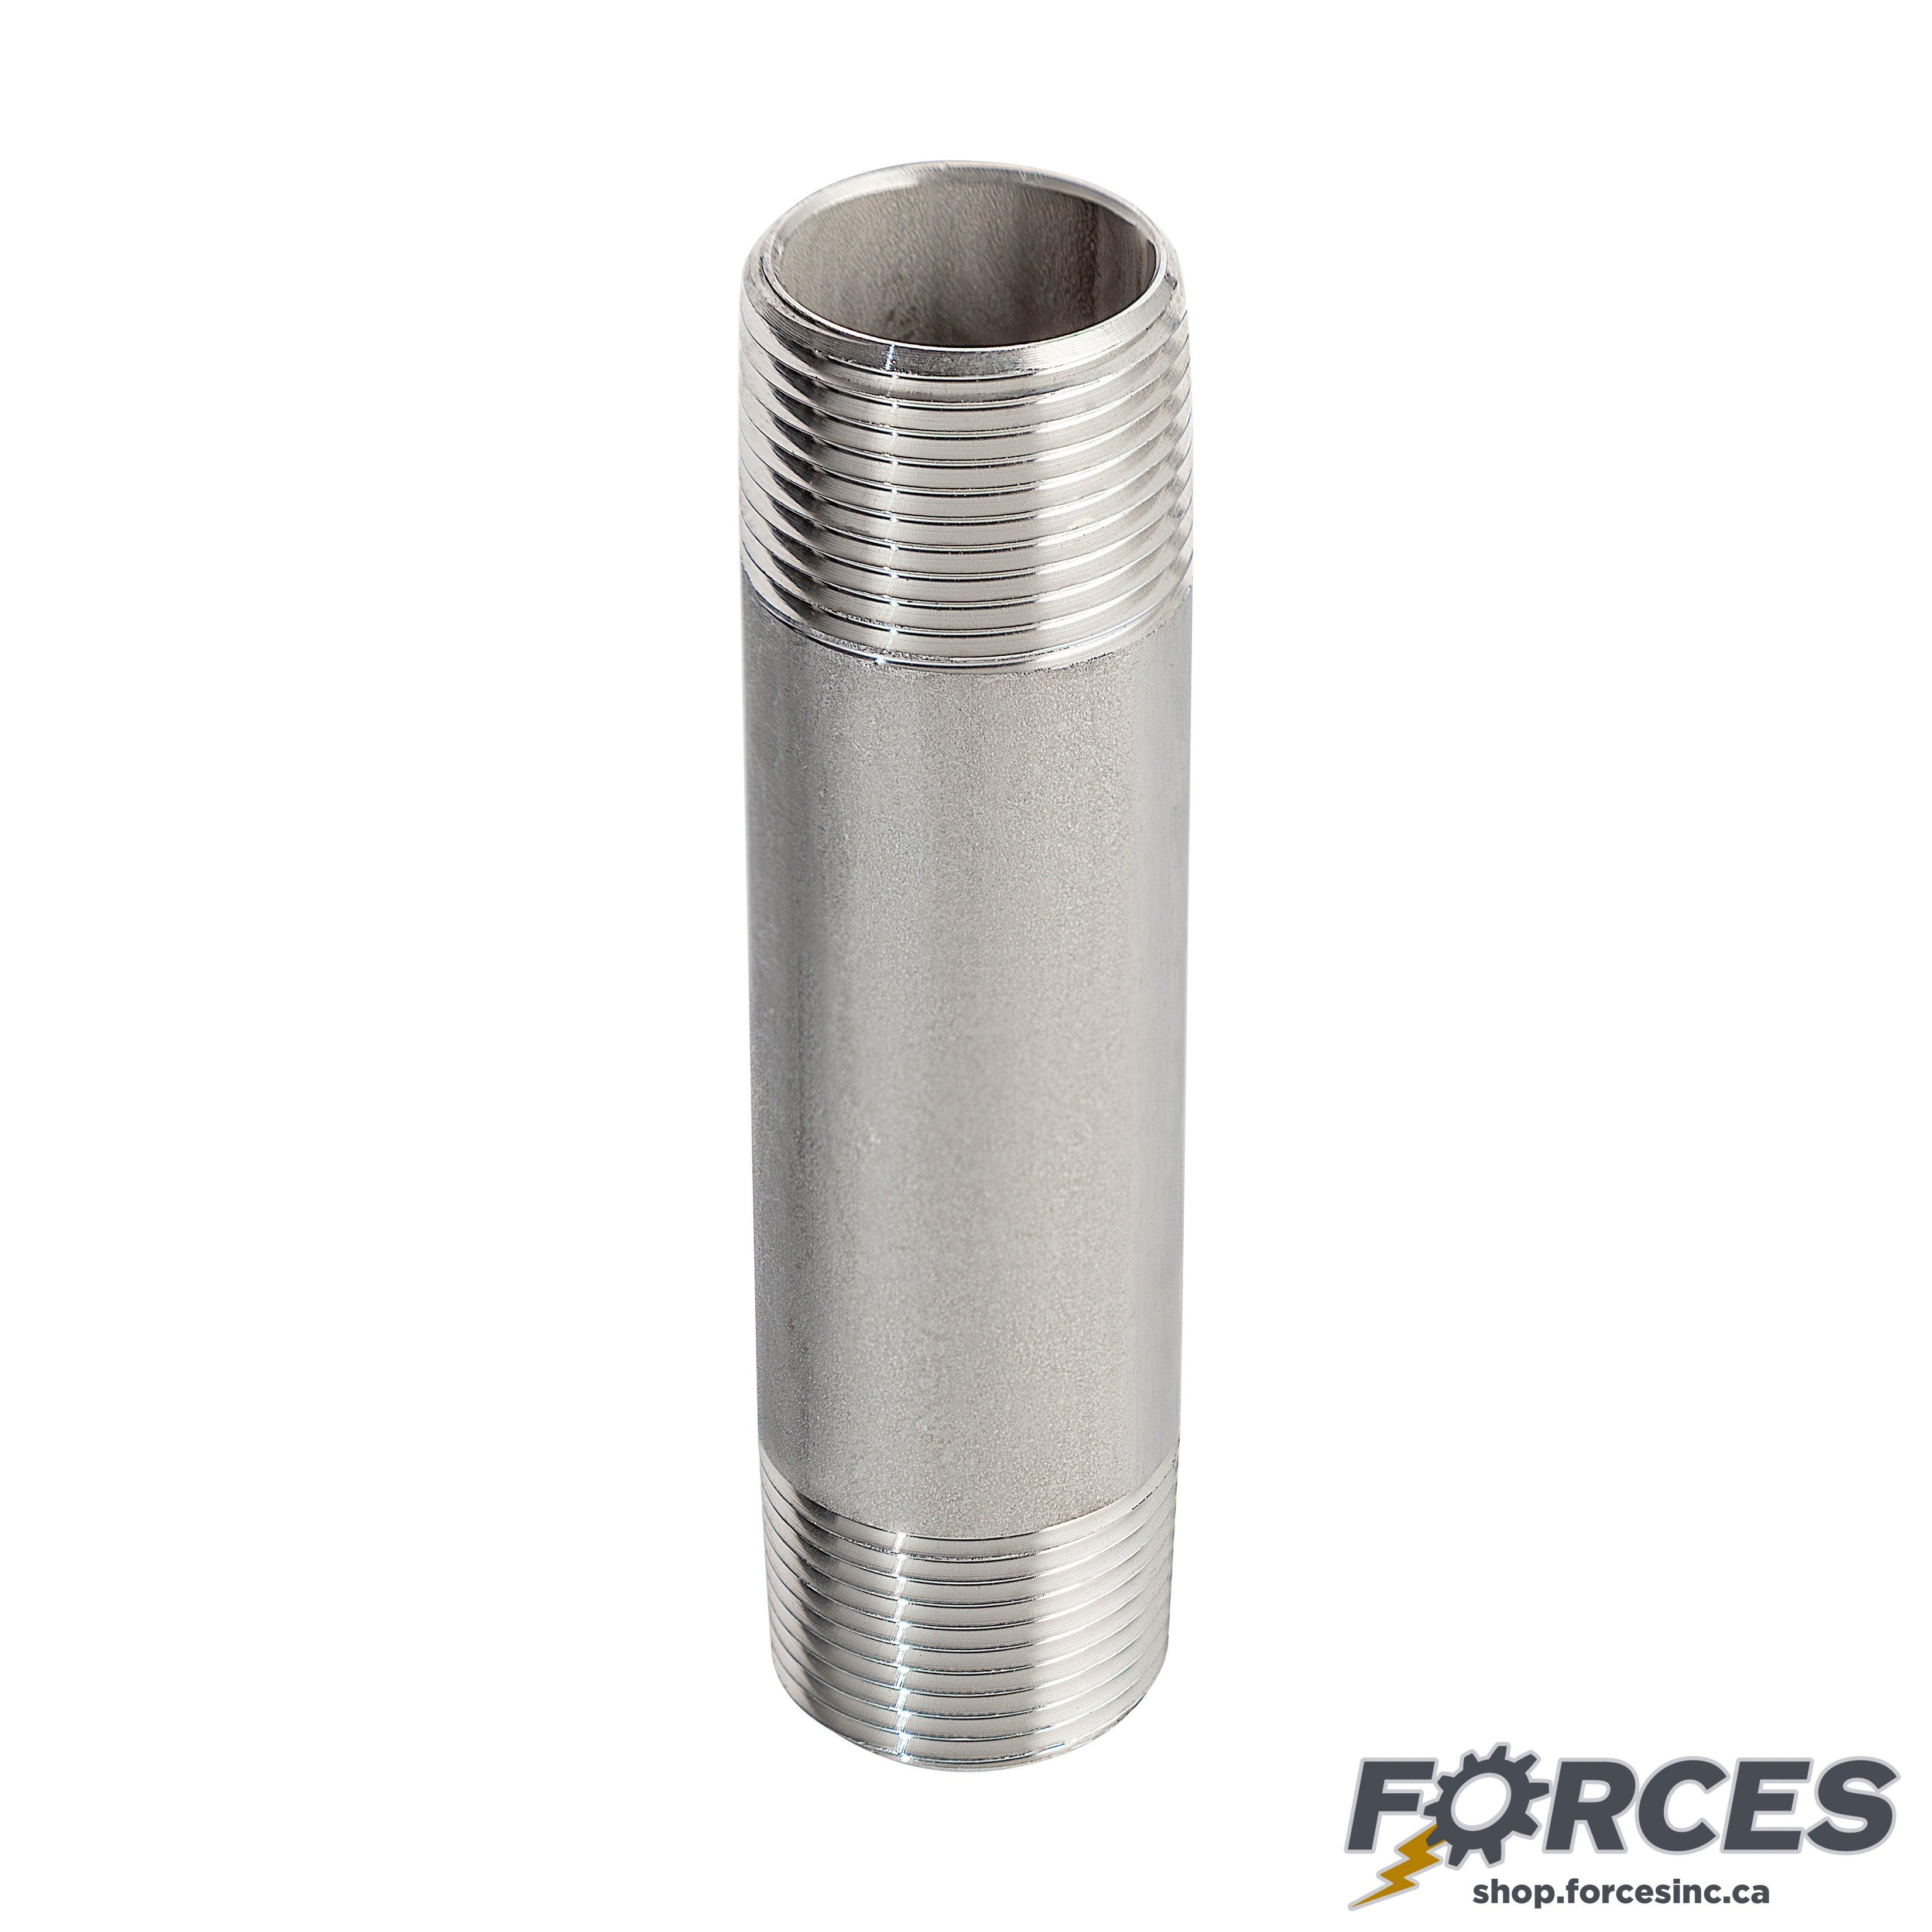 1/8" X 3" Long Nipple - Stainless Steel 316 - Forces Inc